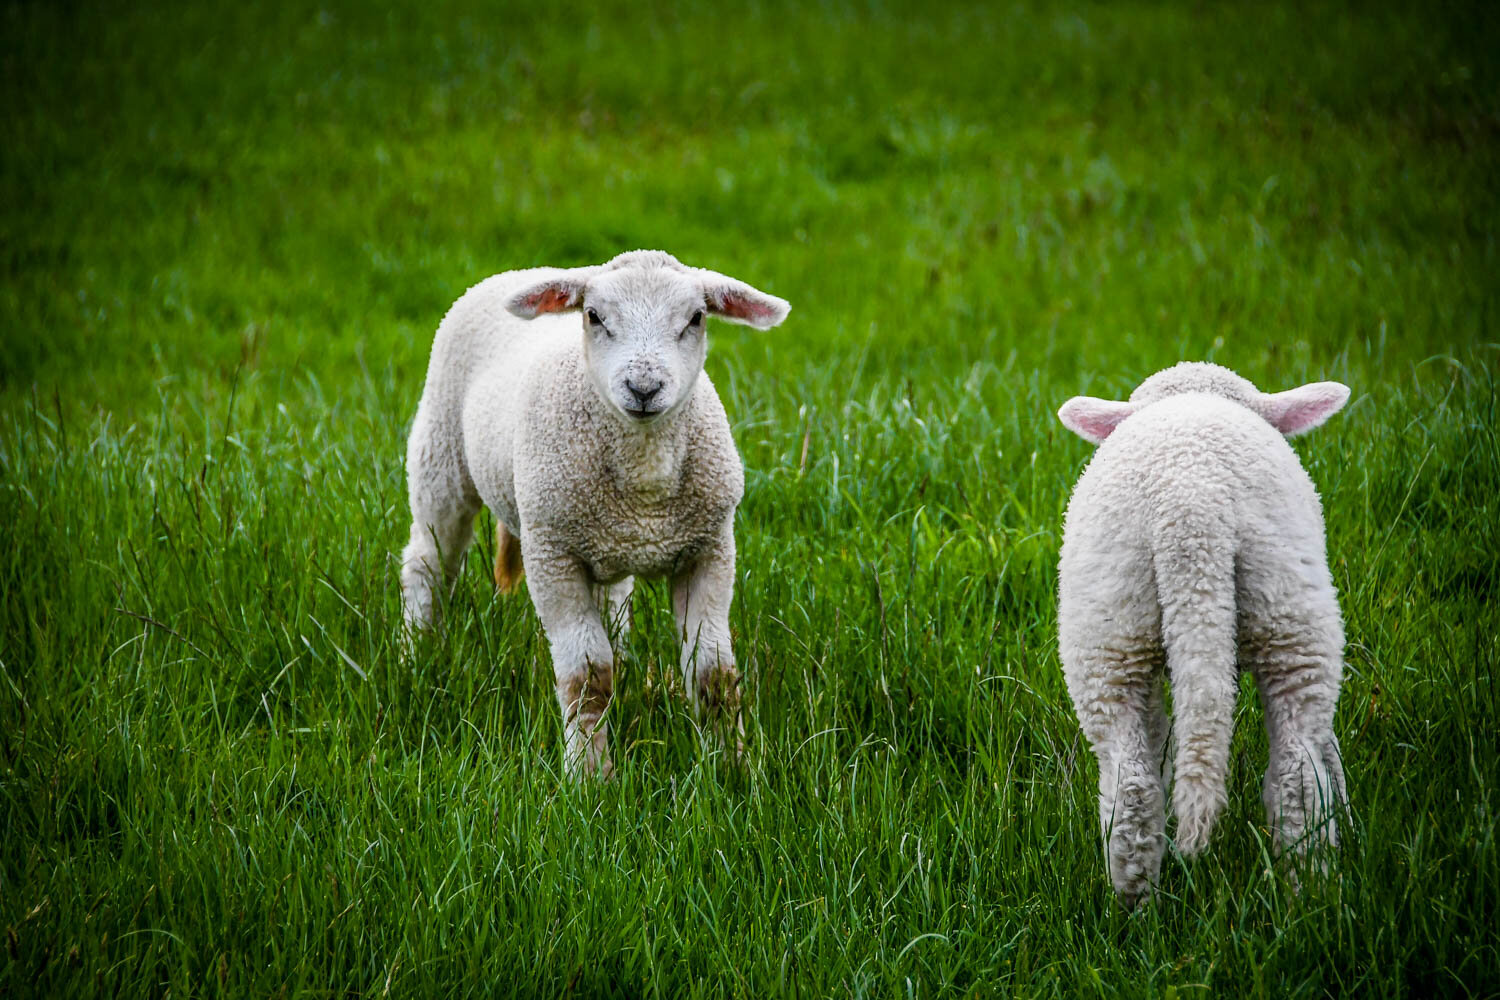 Fun Fact: Did you know that sheep are born with long tails (see the picture!), but they are often cut off to decrease chances of infection (yep, from poo getting stuck in it!). We had no idea about this until we saw these sweet baby sheep with their long tails!